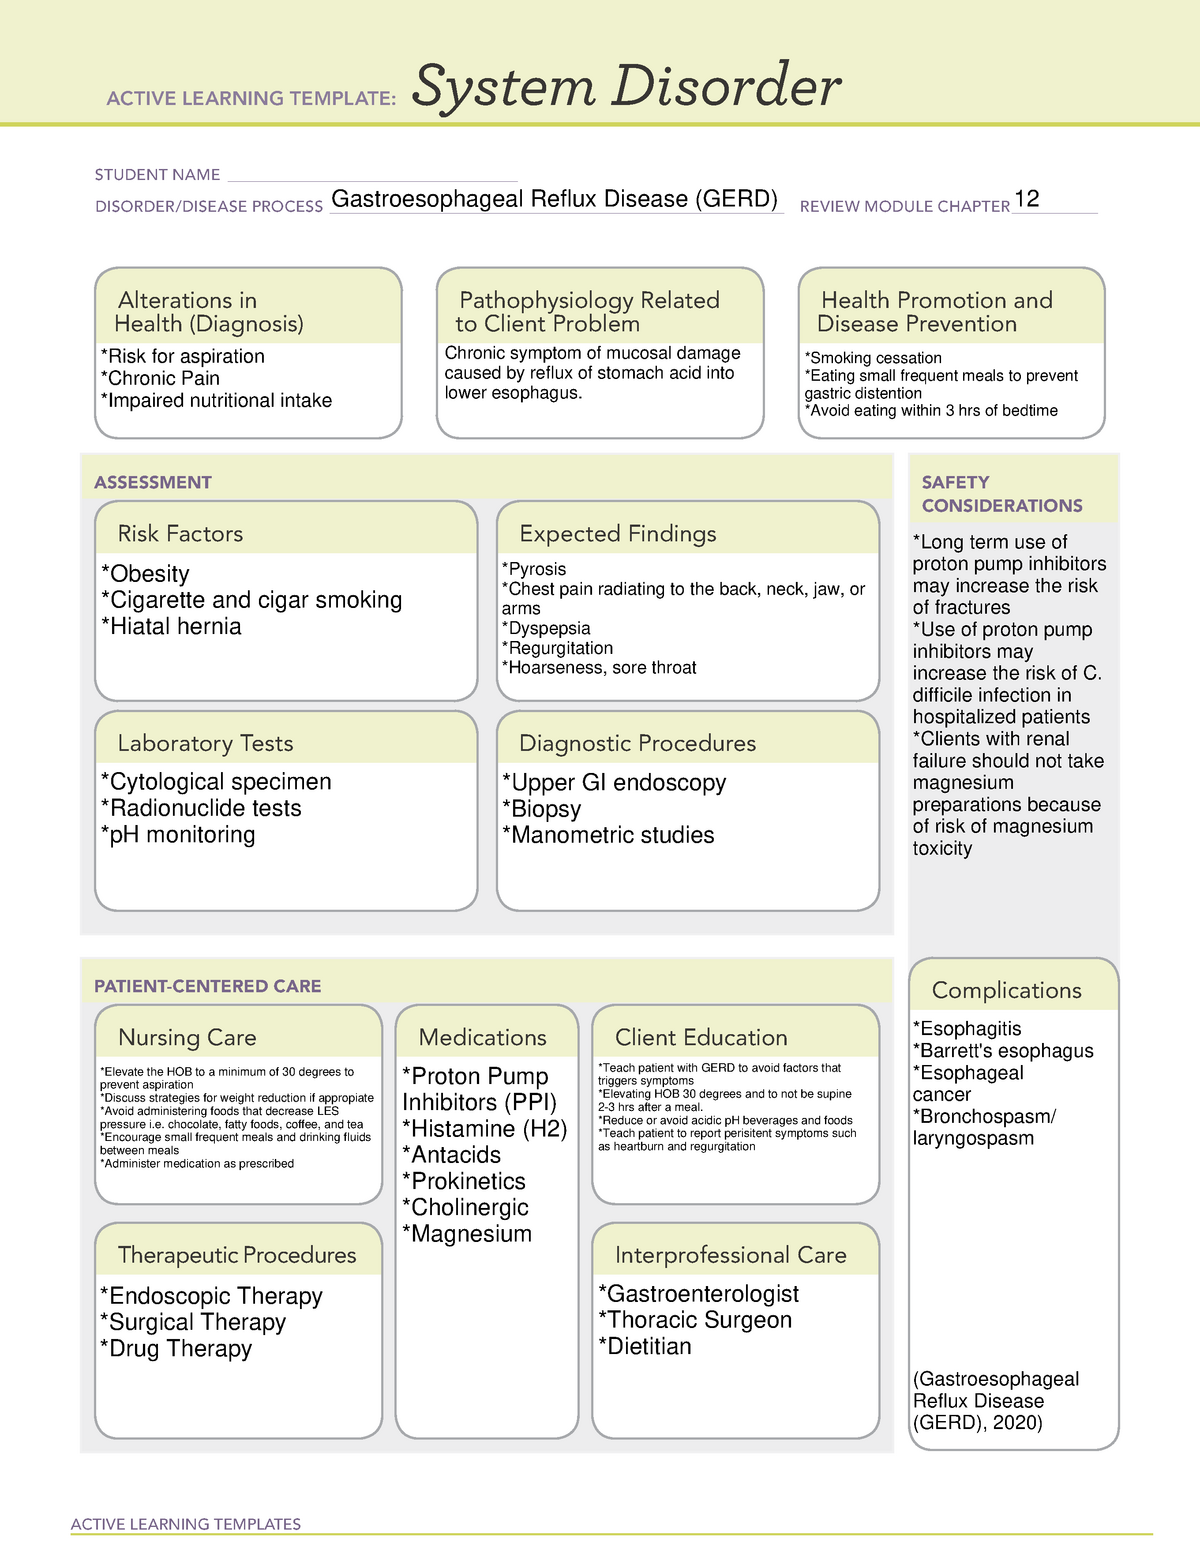 system-disorder-gerd-ati-template-active-learning-templates-system